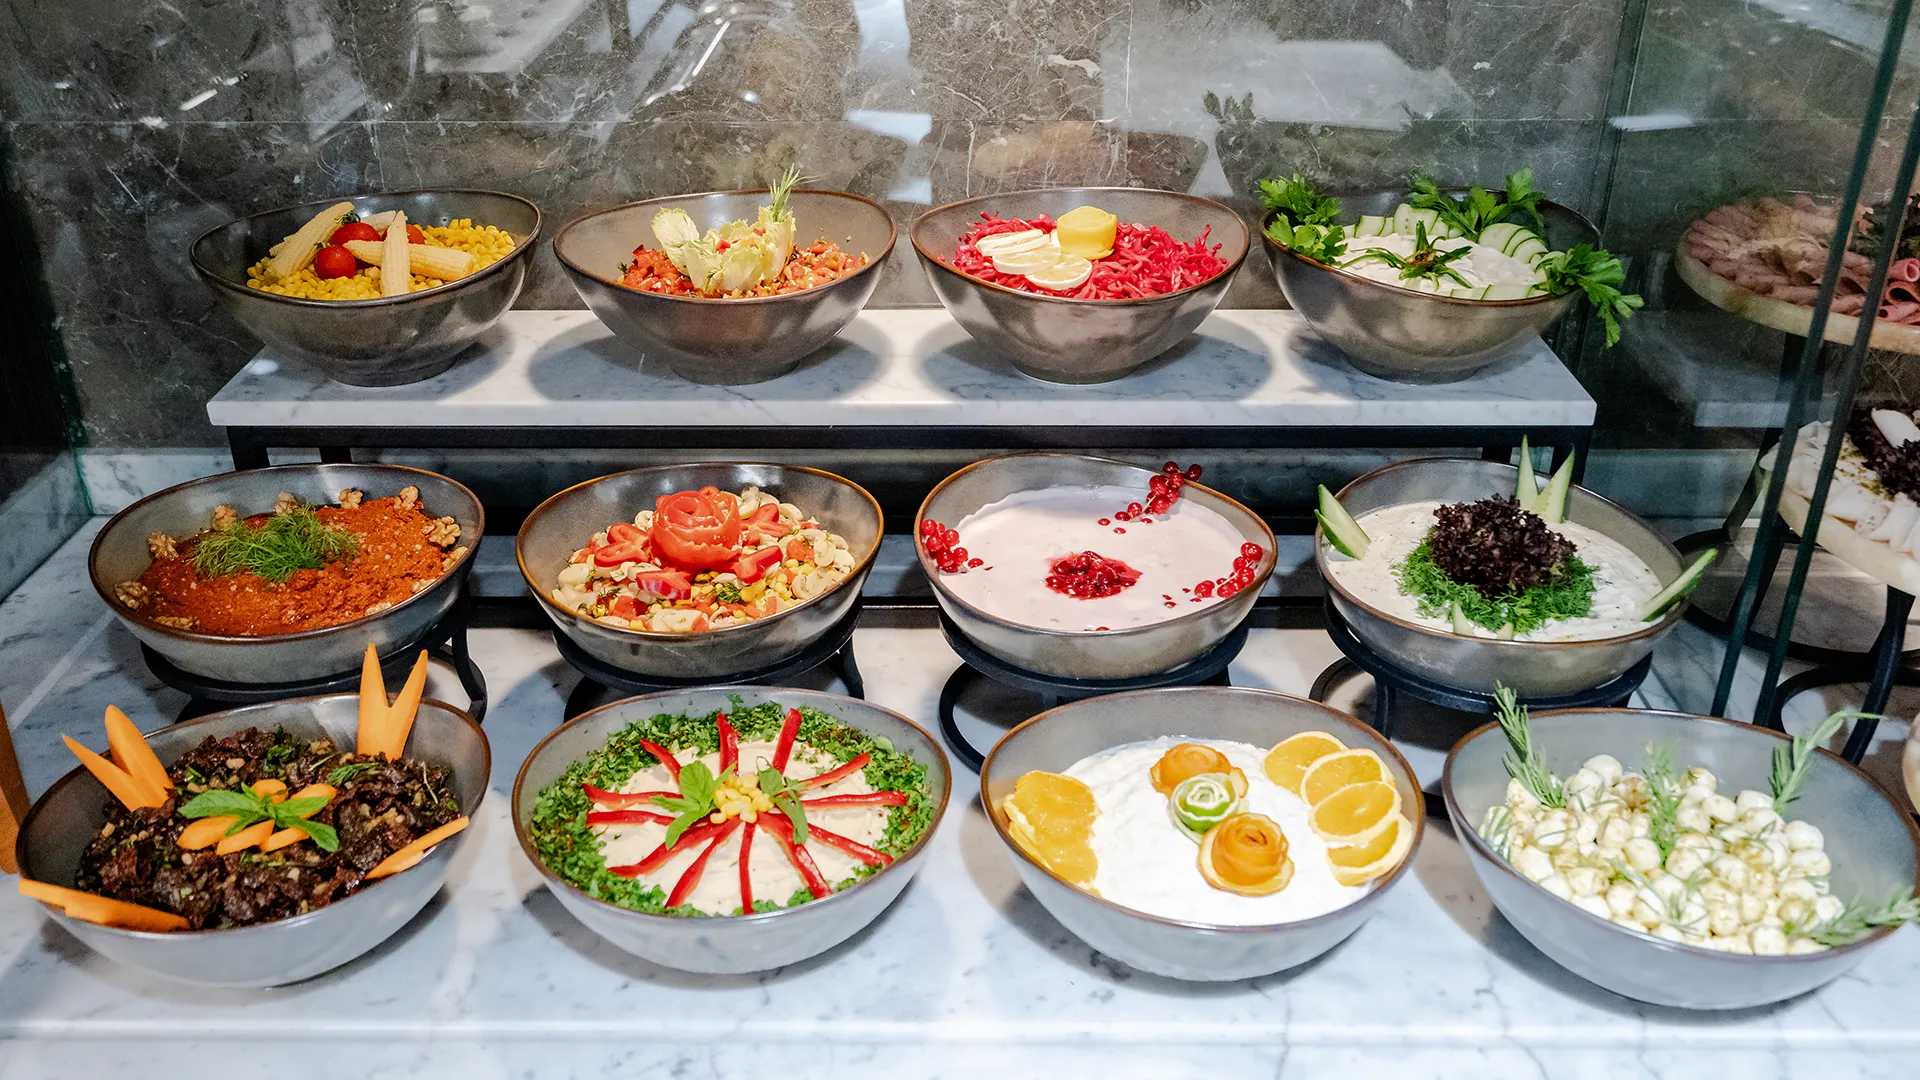 Various bowls of food are on display in a breakfast buffet.